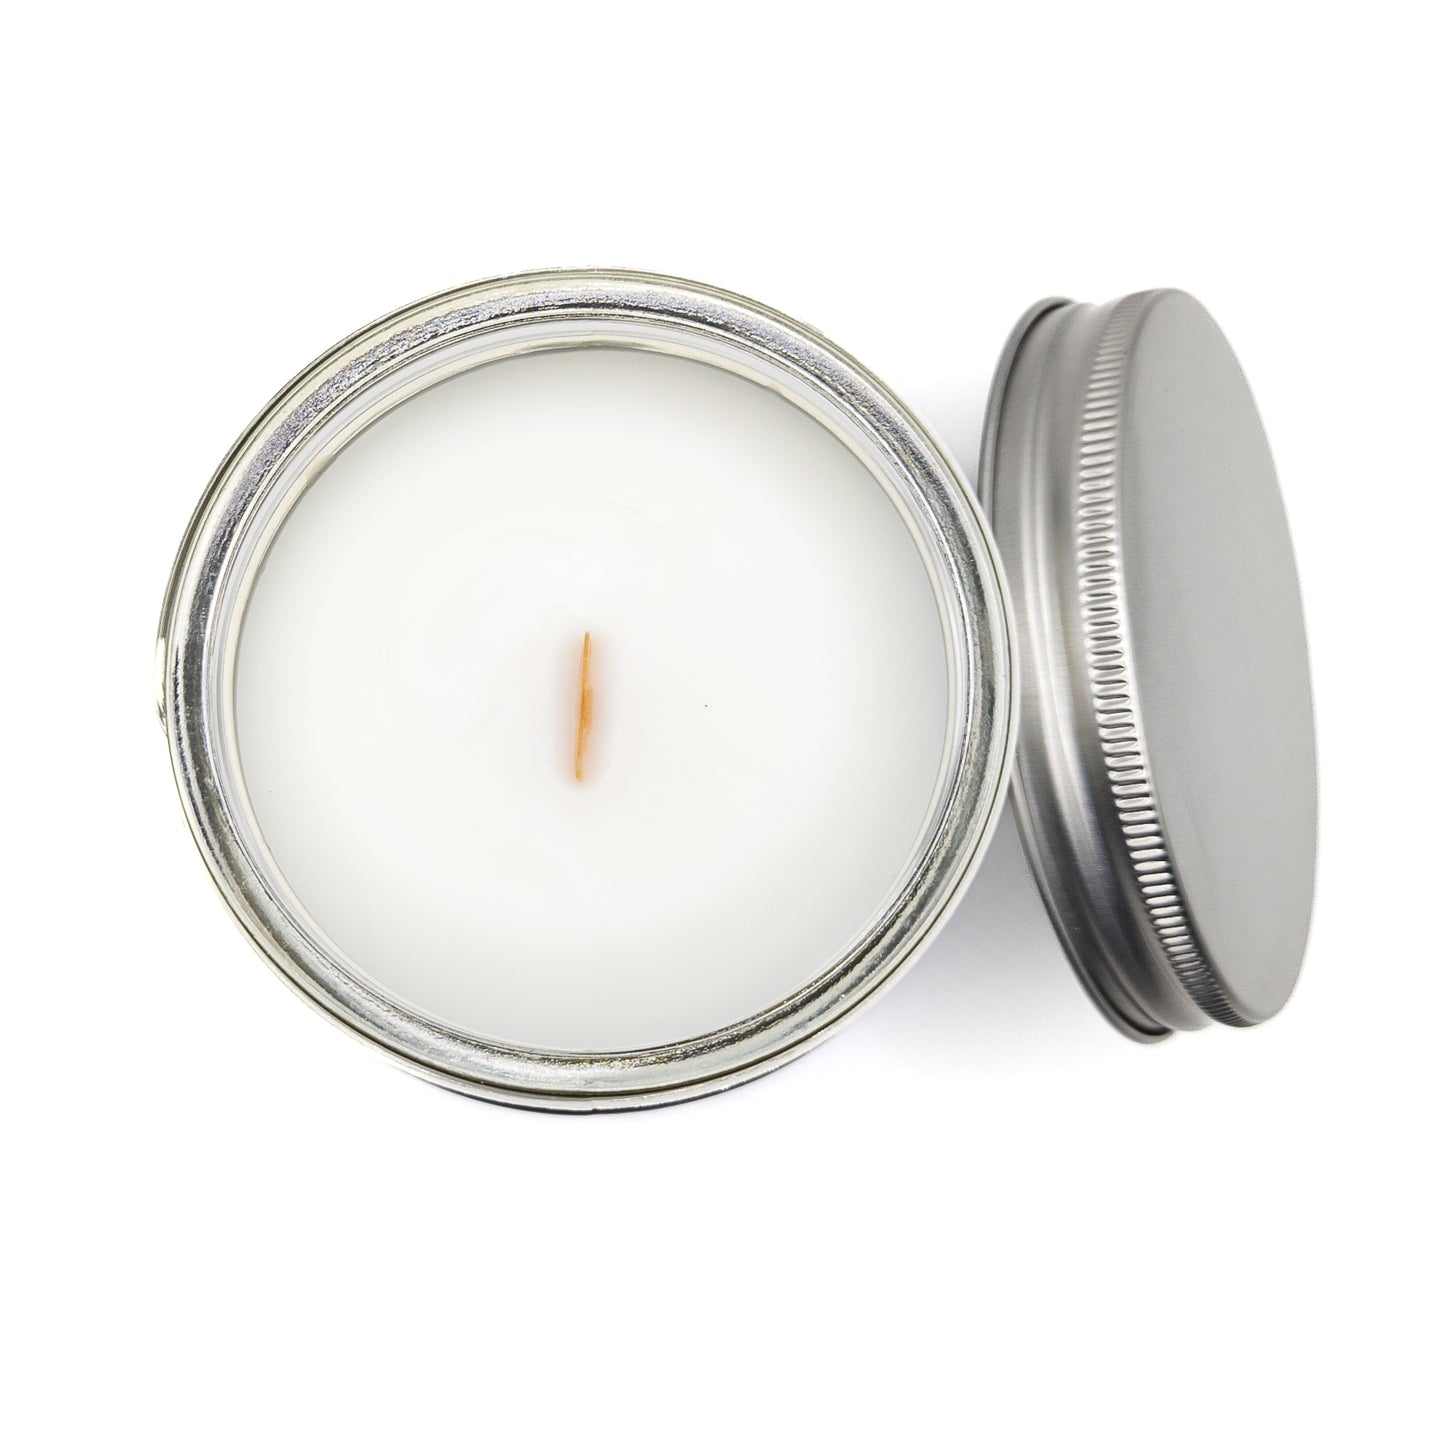 Coconut apricot wax scented candles with crackling wooden wicks